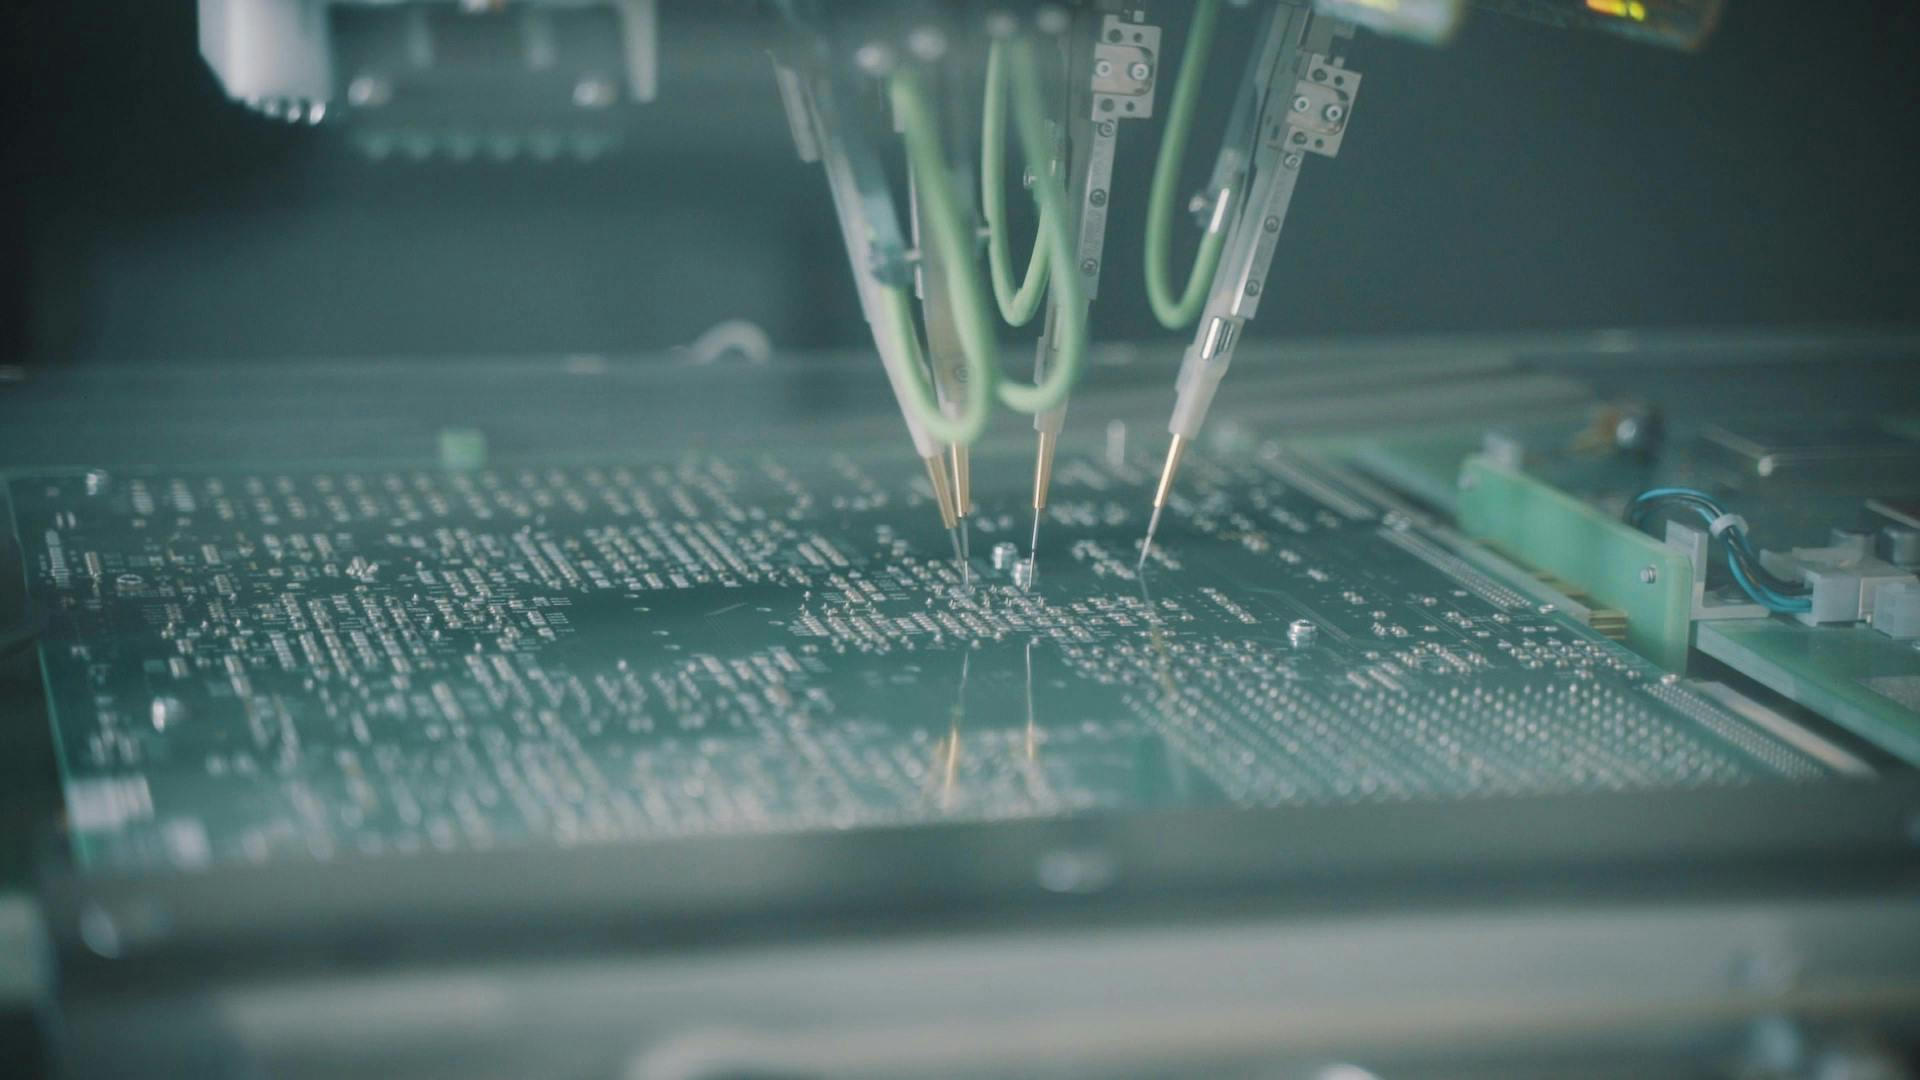 Optimize your PCB layout for improved testability and manufacturing efficiency